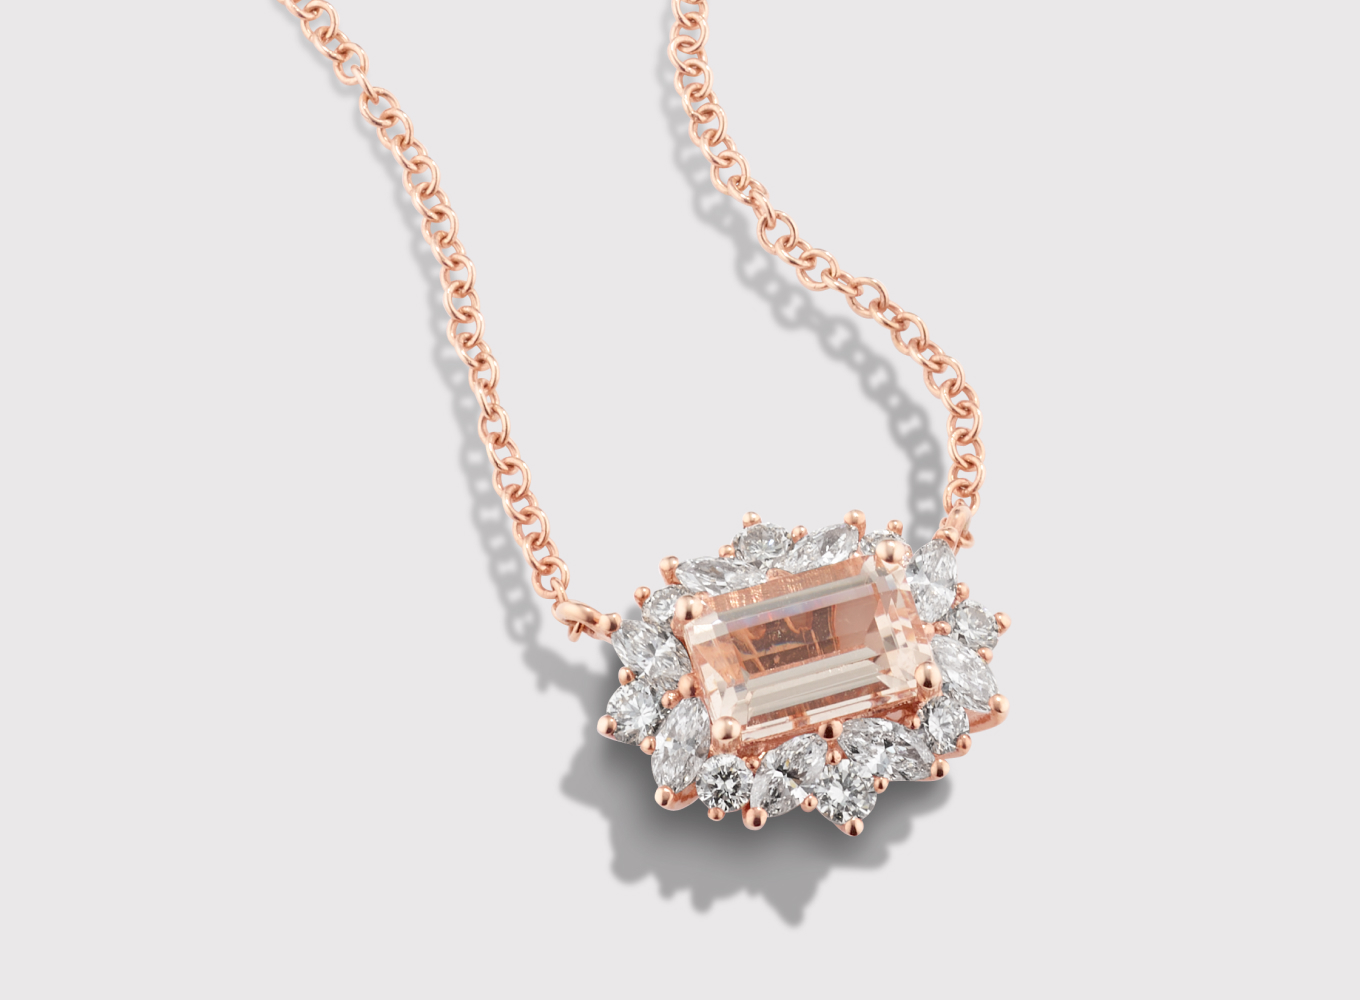 Desert Rose Morganite & Diamond Halo Pendant This gorgeous pendant features a natural peach morganite gemstone at its center. A halo of round and marquise natural diamond accents creates a floral look, while 14-karat rose gold perfectly complements the morganite gemstone. A matching rolo chain with a lobster clasp keeps this necklace secure. 